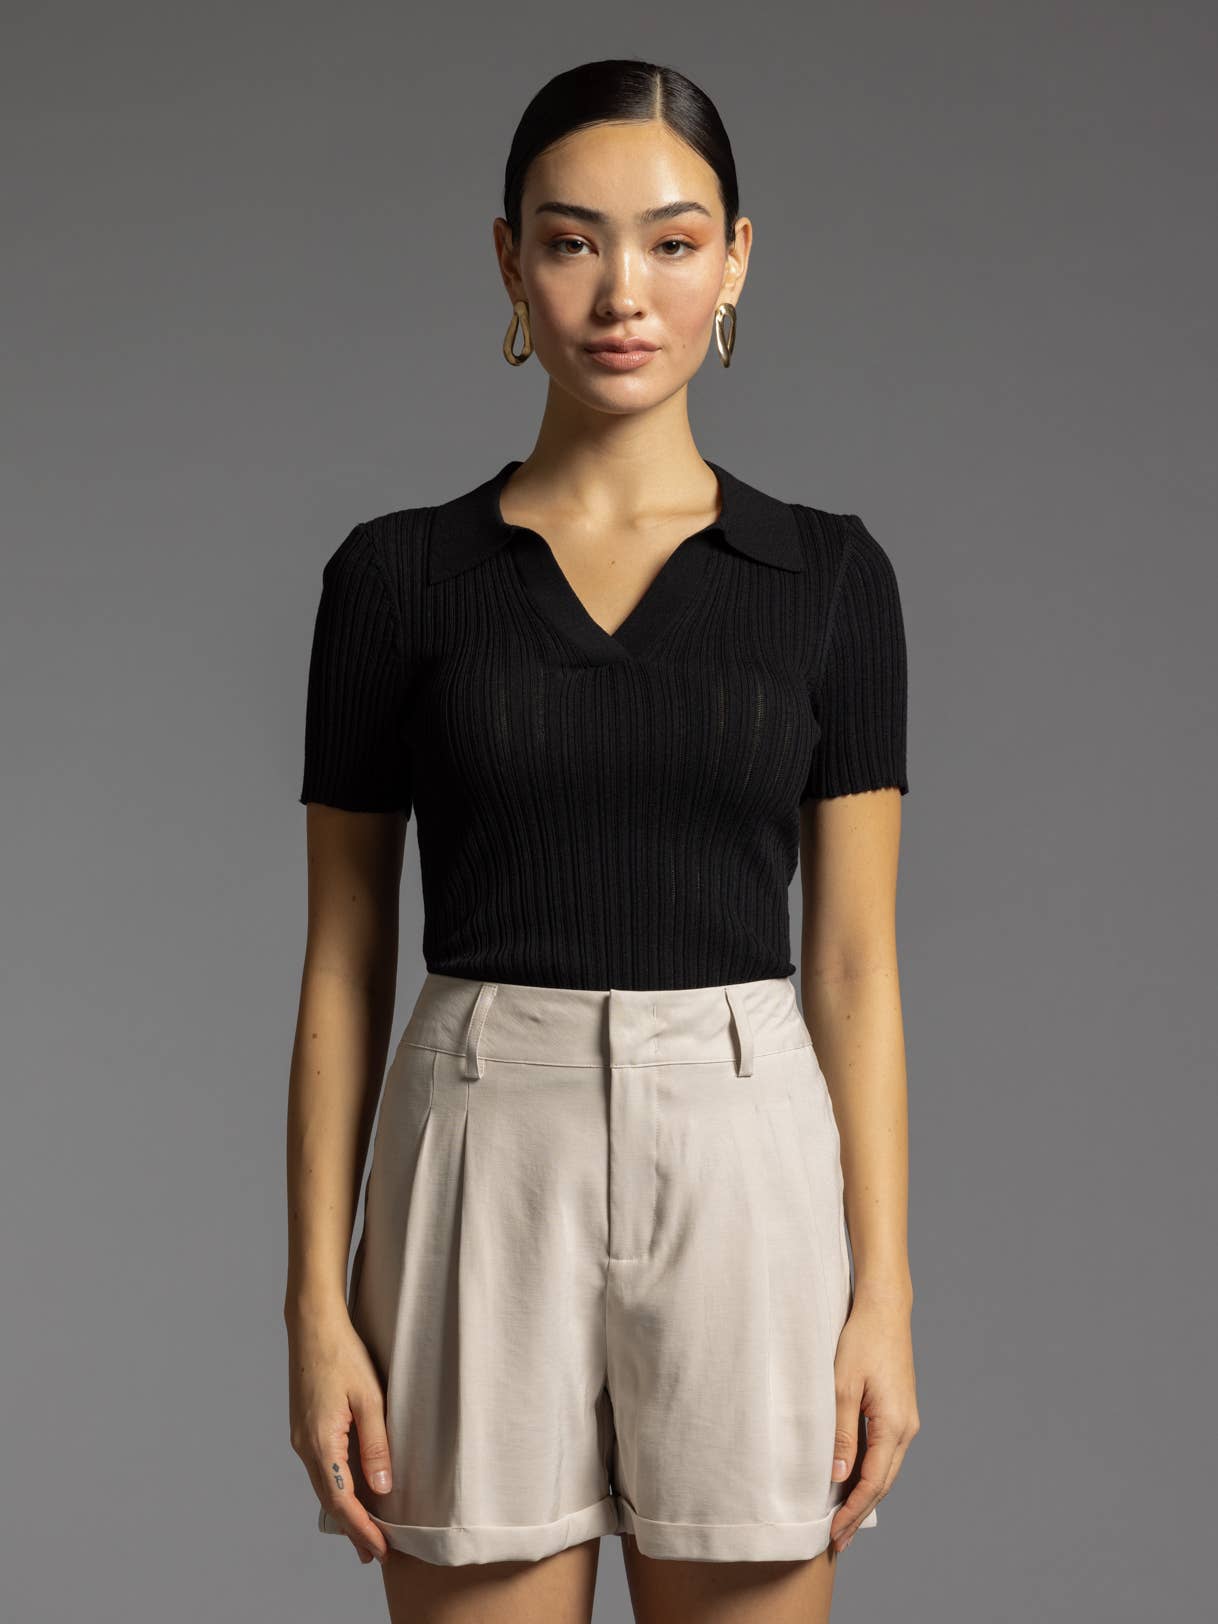 The Courtney Top - Black